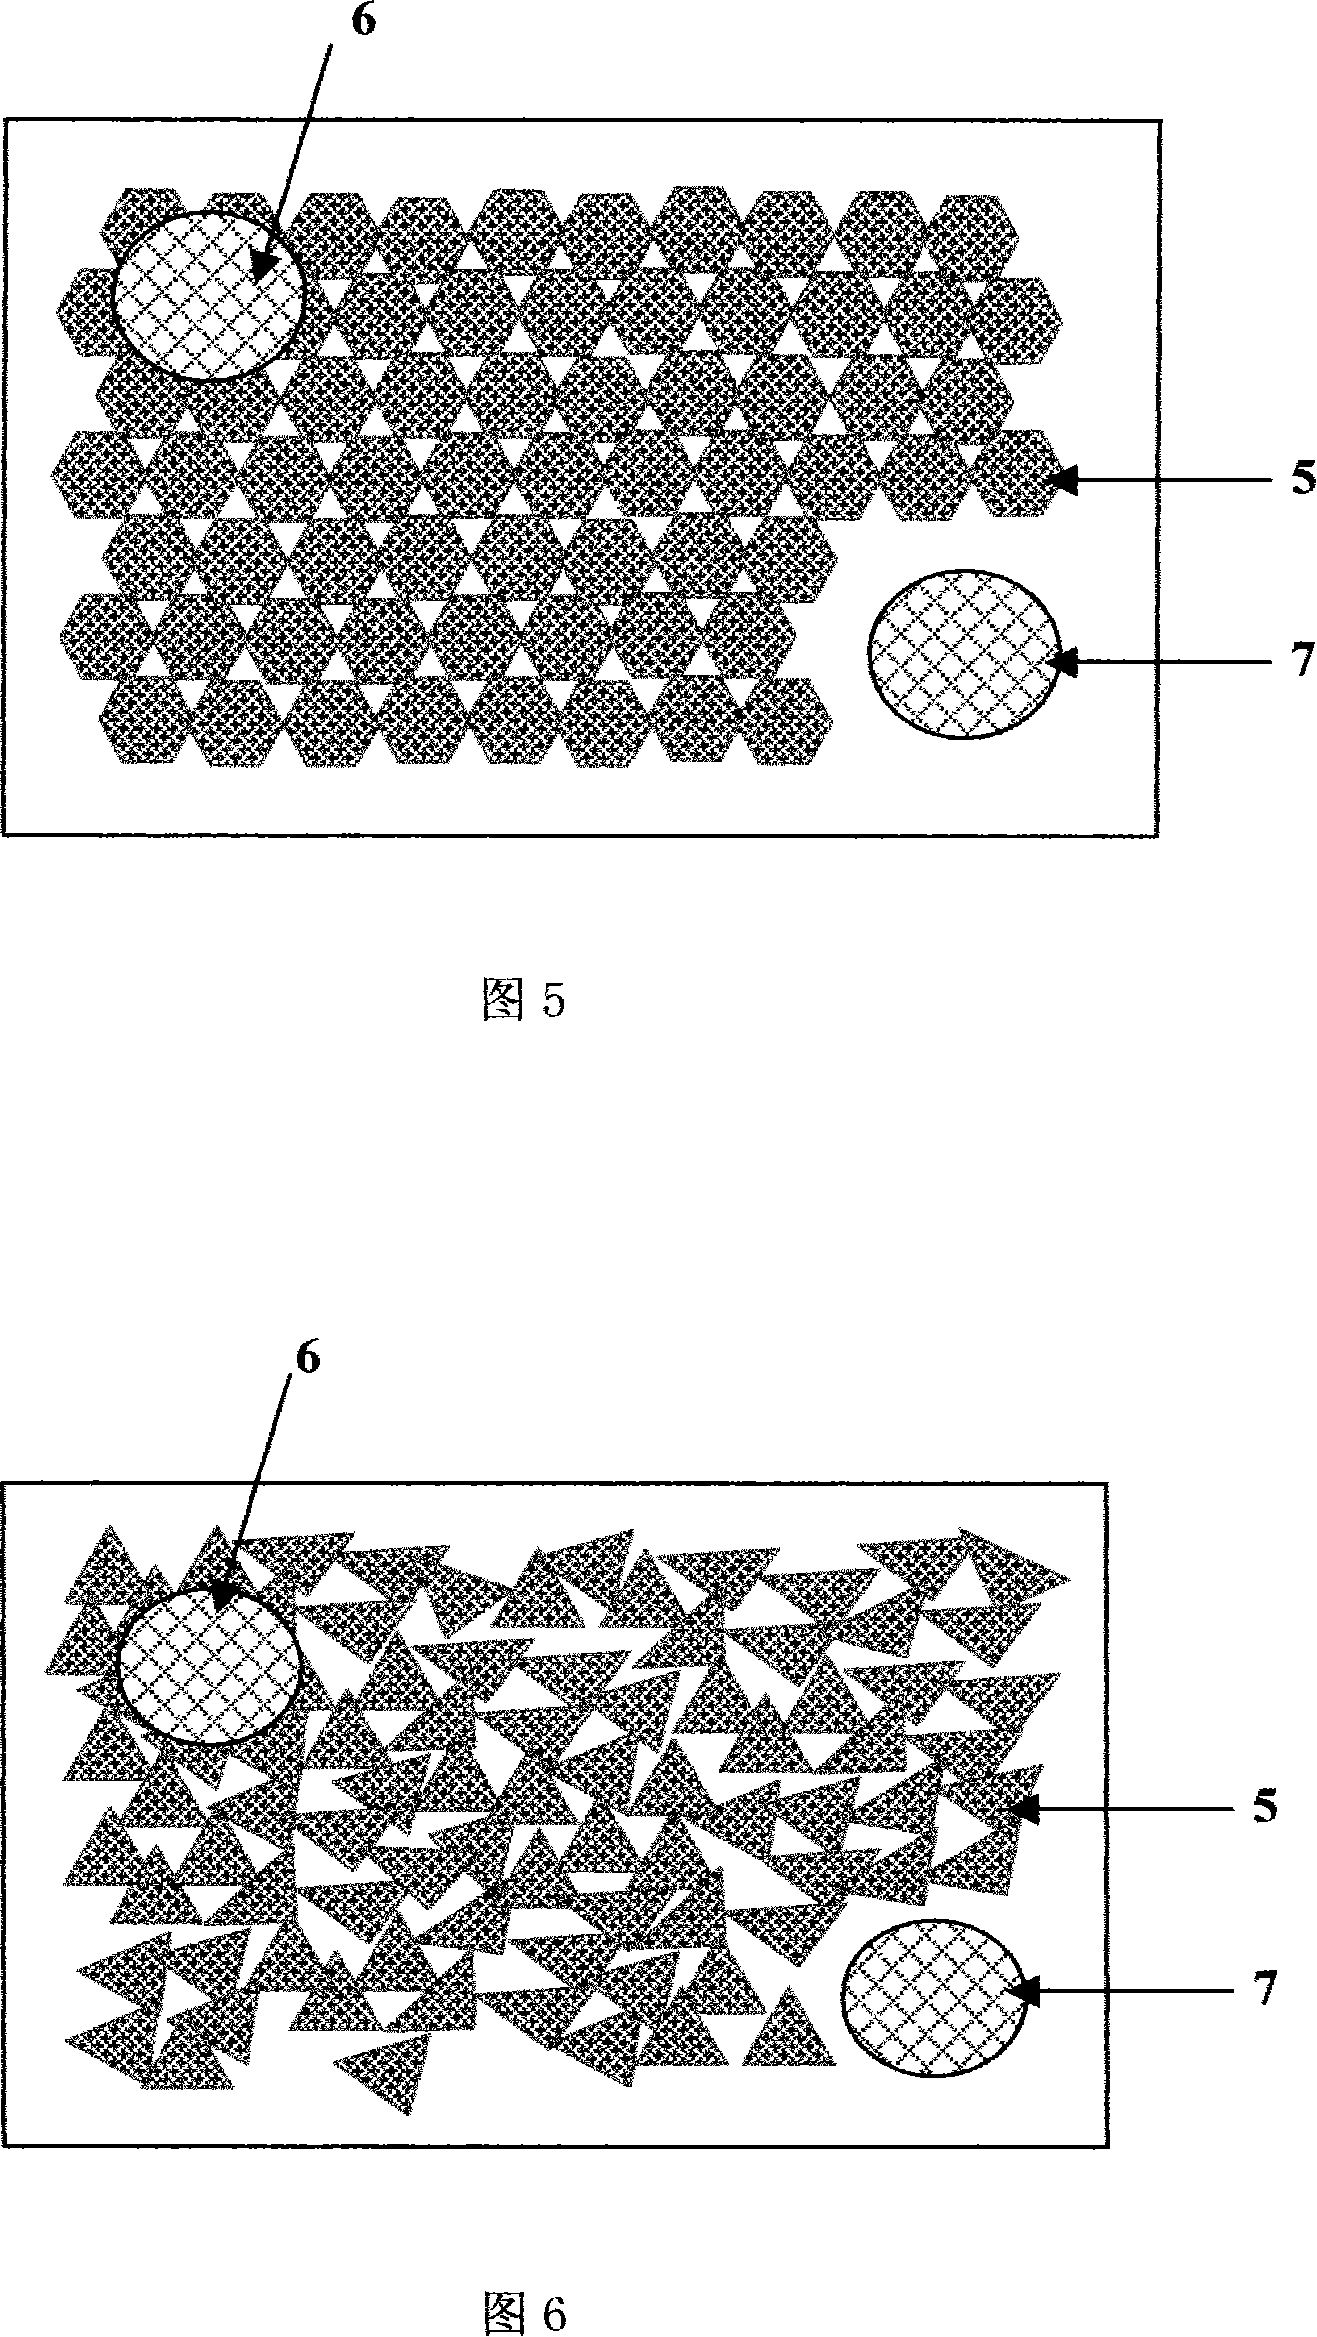 High efficiency light emitting diode with surface mini column array structure using diffraction effect